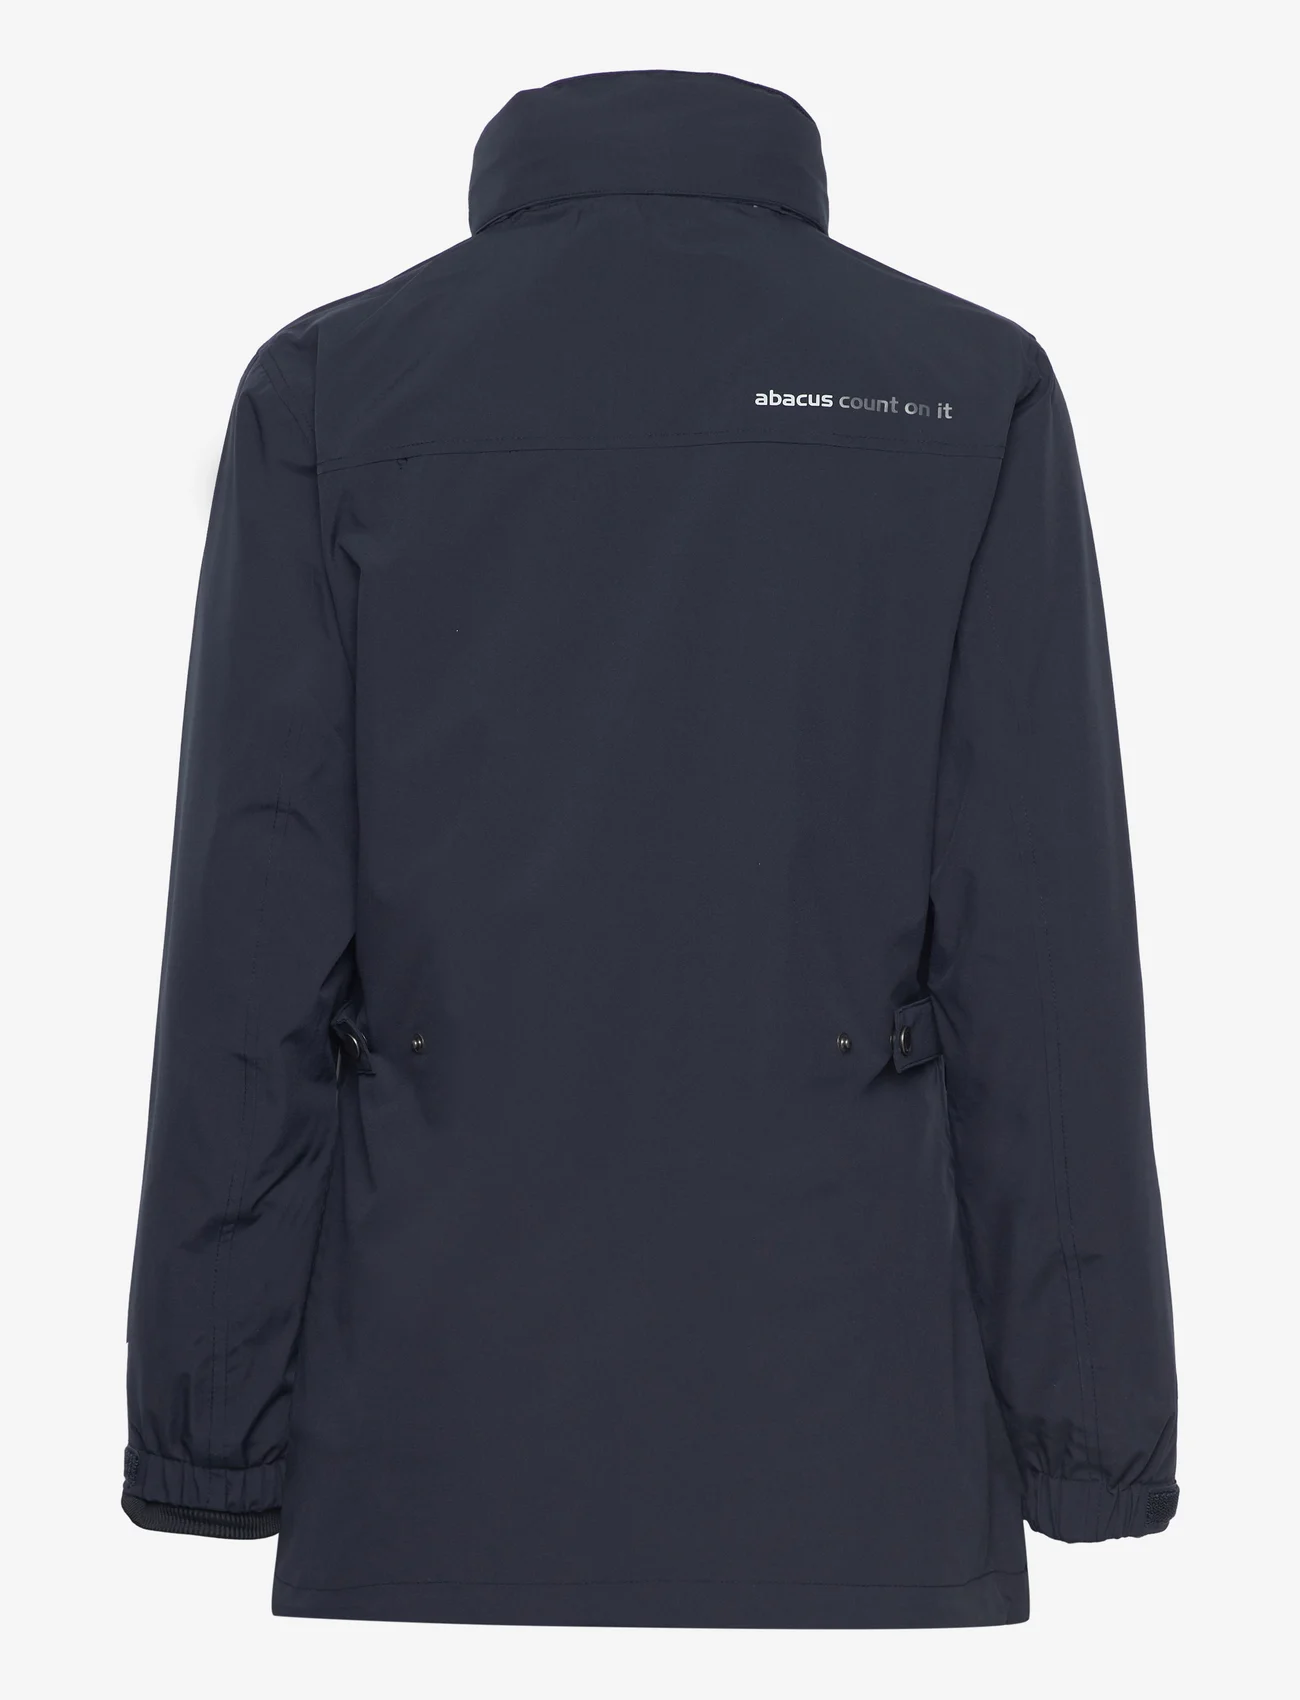 Abacus - Lds Staff 3 in1 jacket - parkad - navy - 1